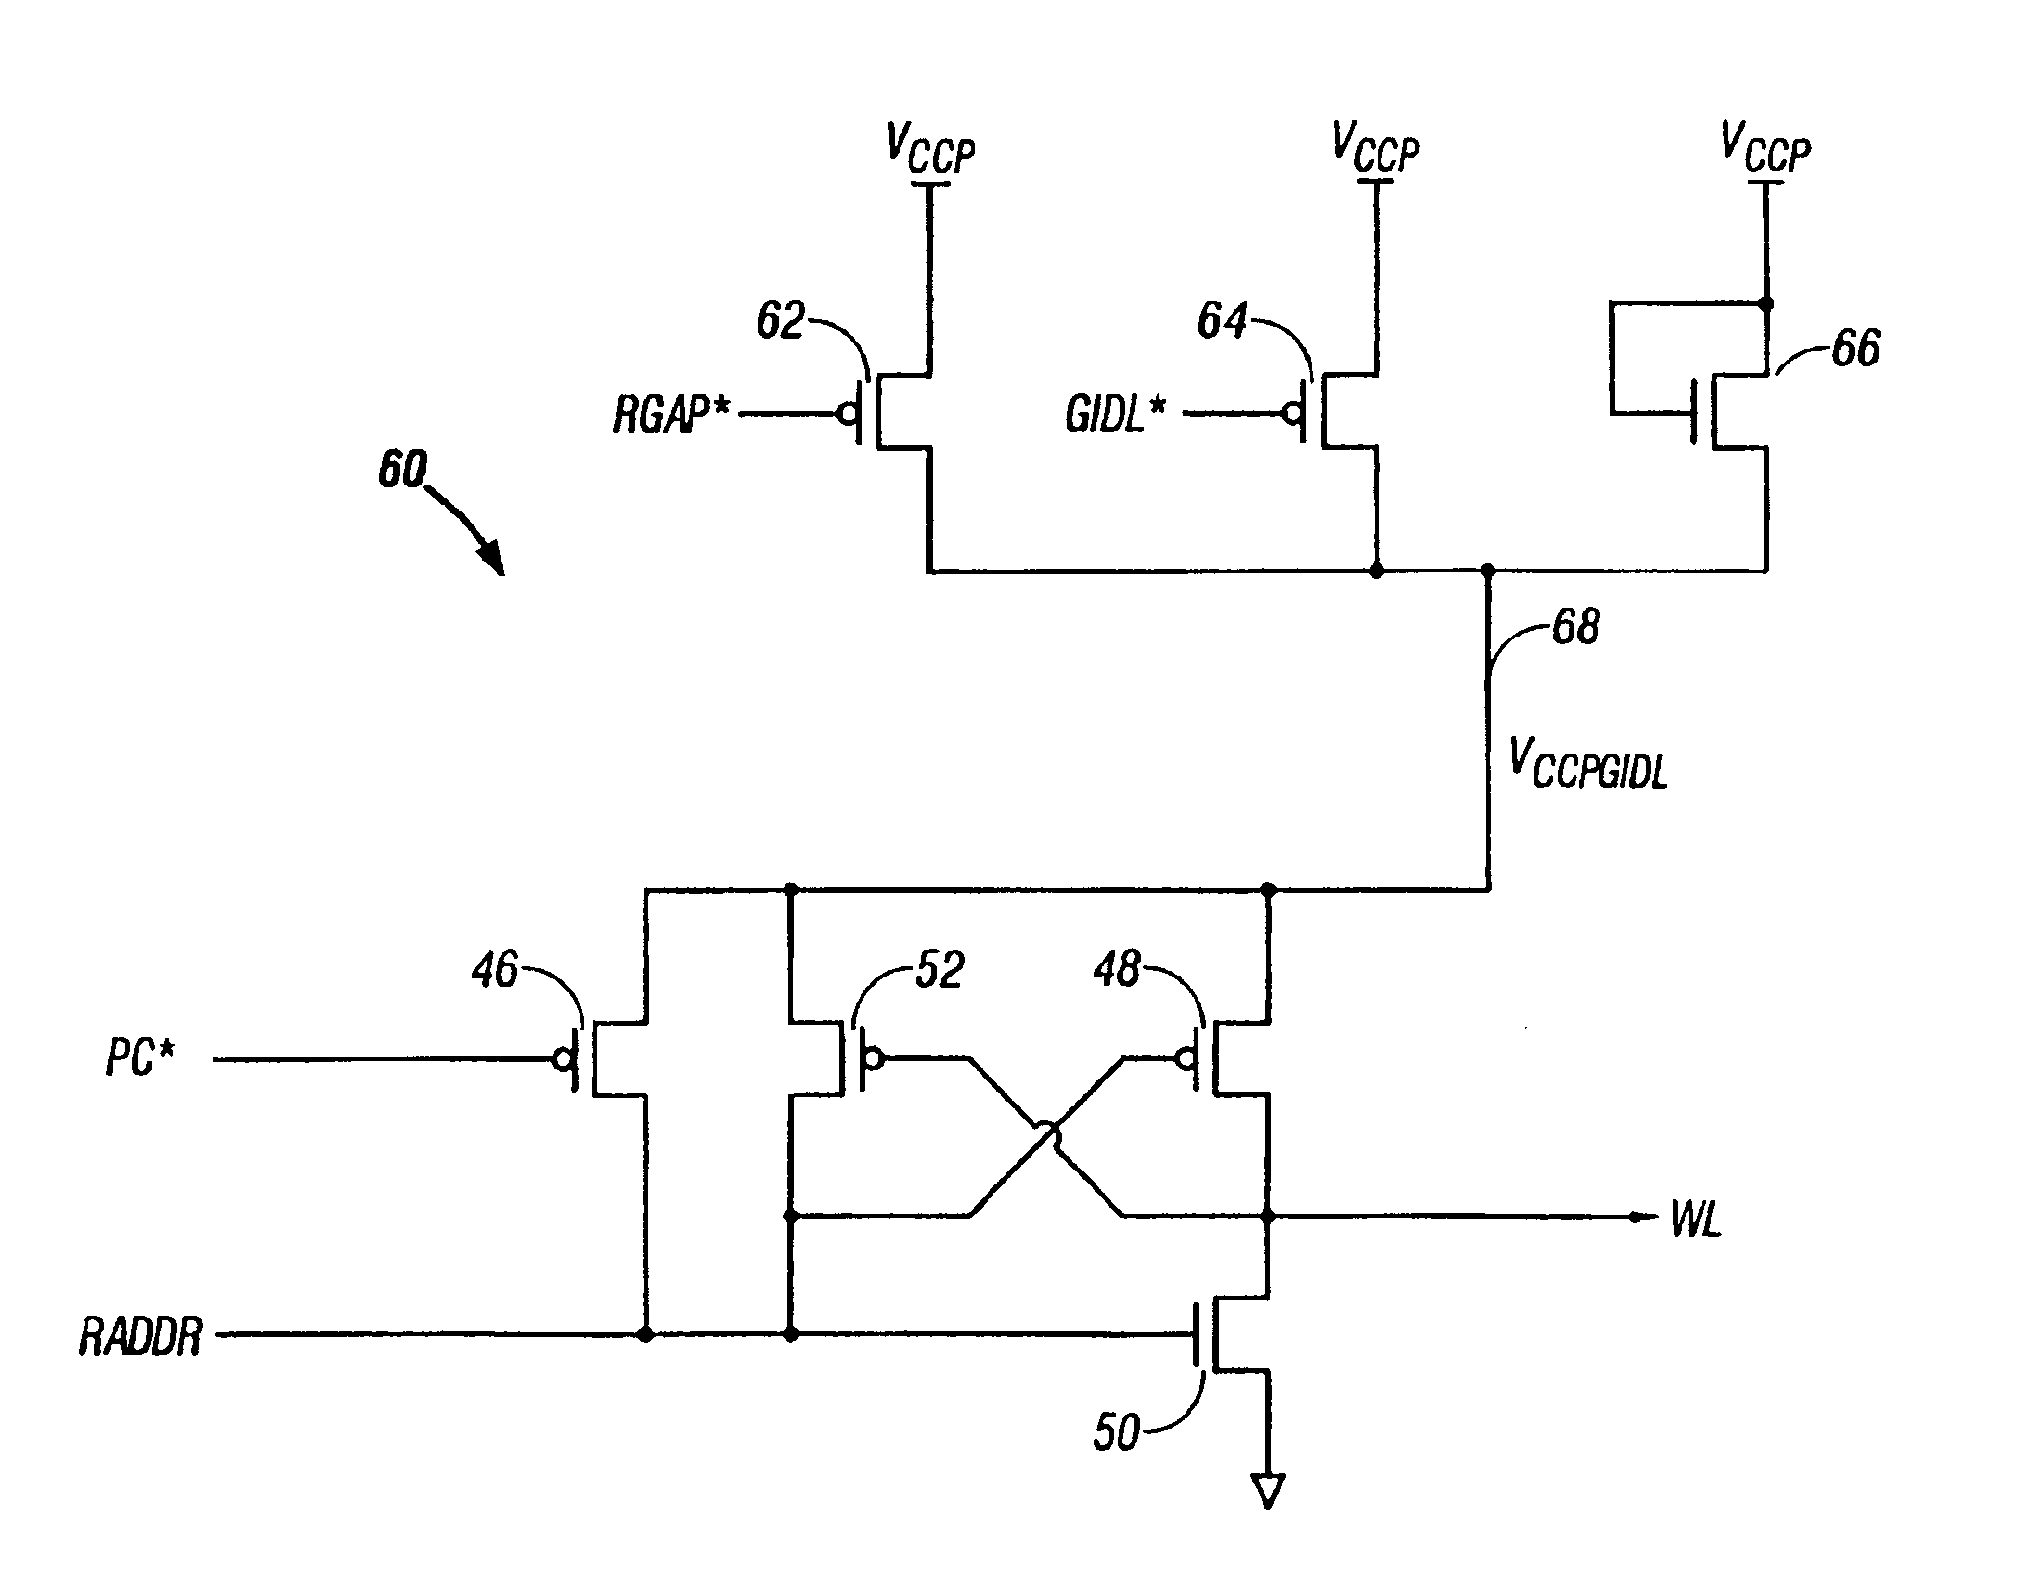 Method and apparatus for standby power reduction in semiconductor devices